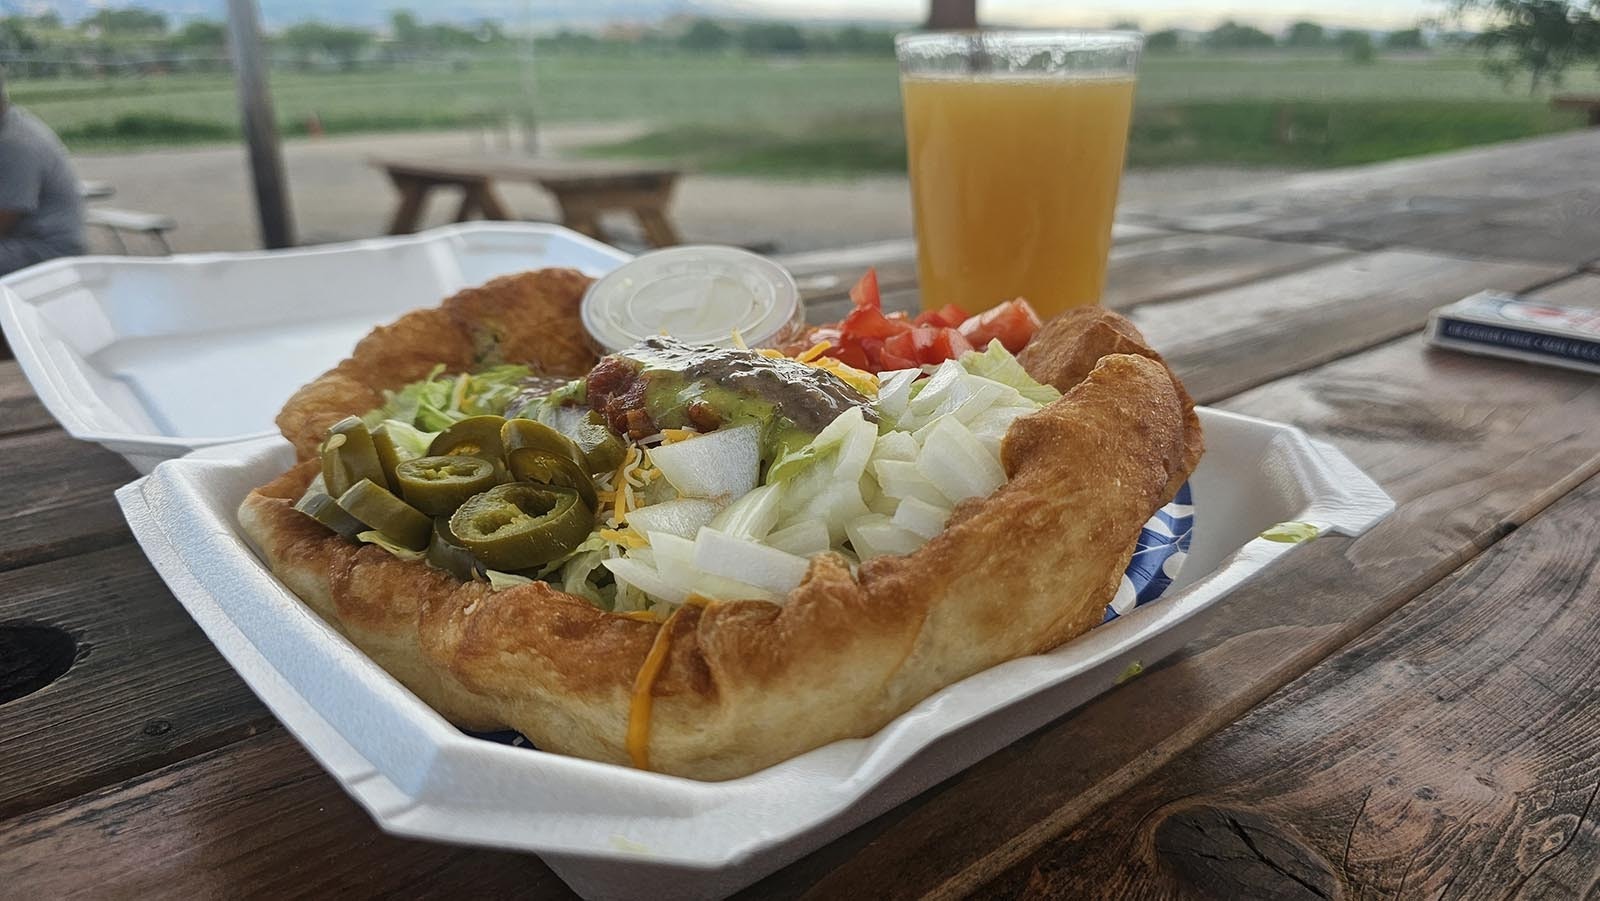 An Indian taco with a cowboy mimosa at Ten Sleep Brewery.